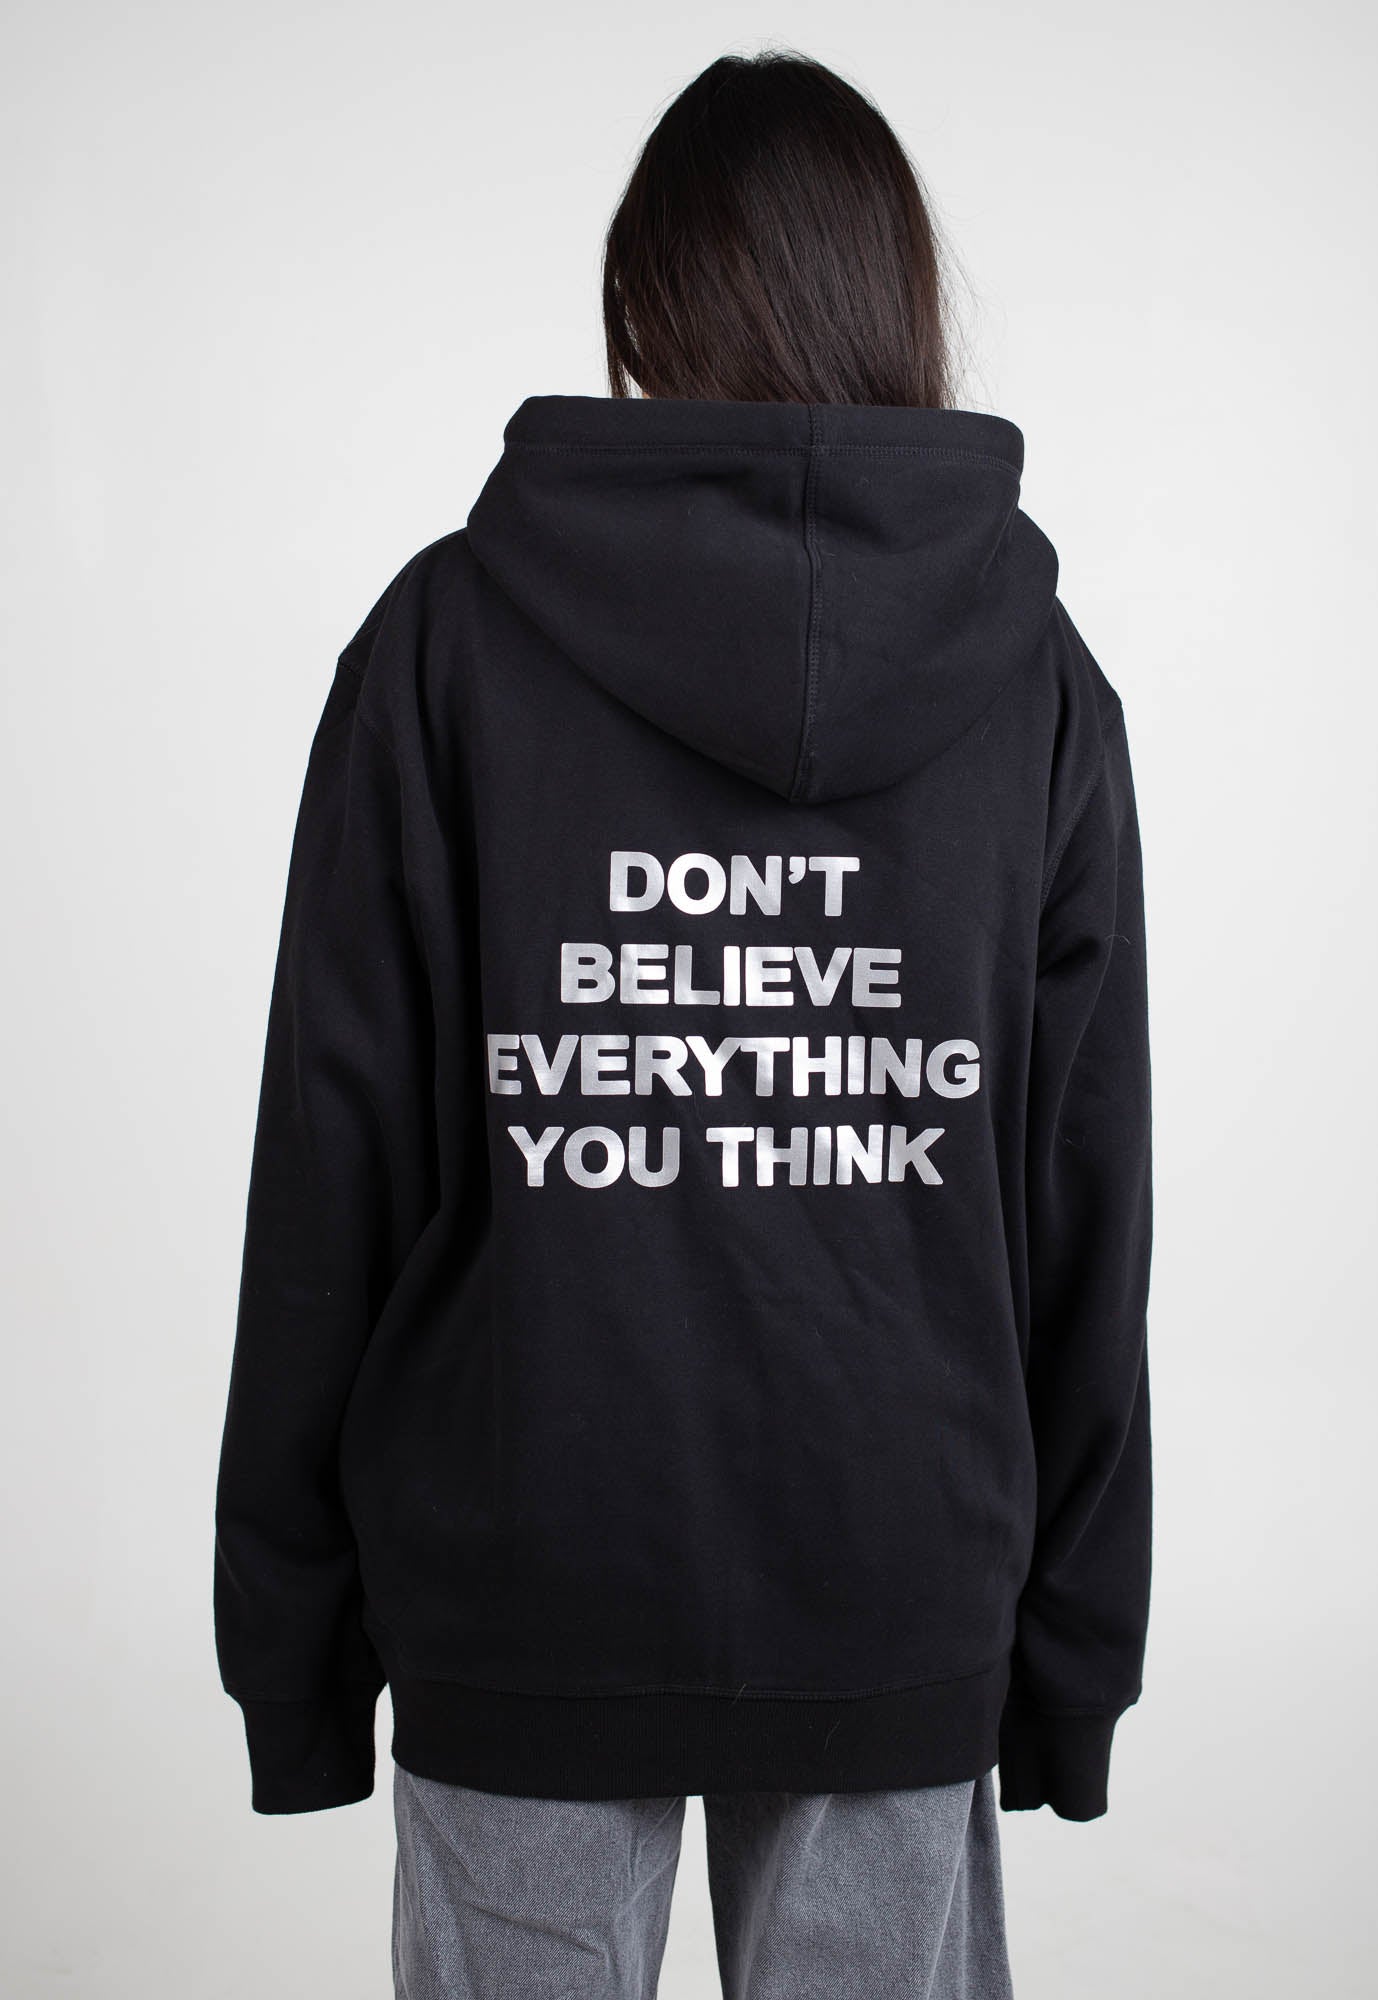 DON'T BELIEVE EVERYTHING YOU THINK REFLECTIVE HOODIE